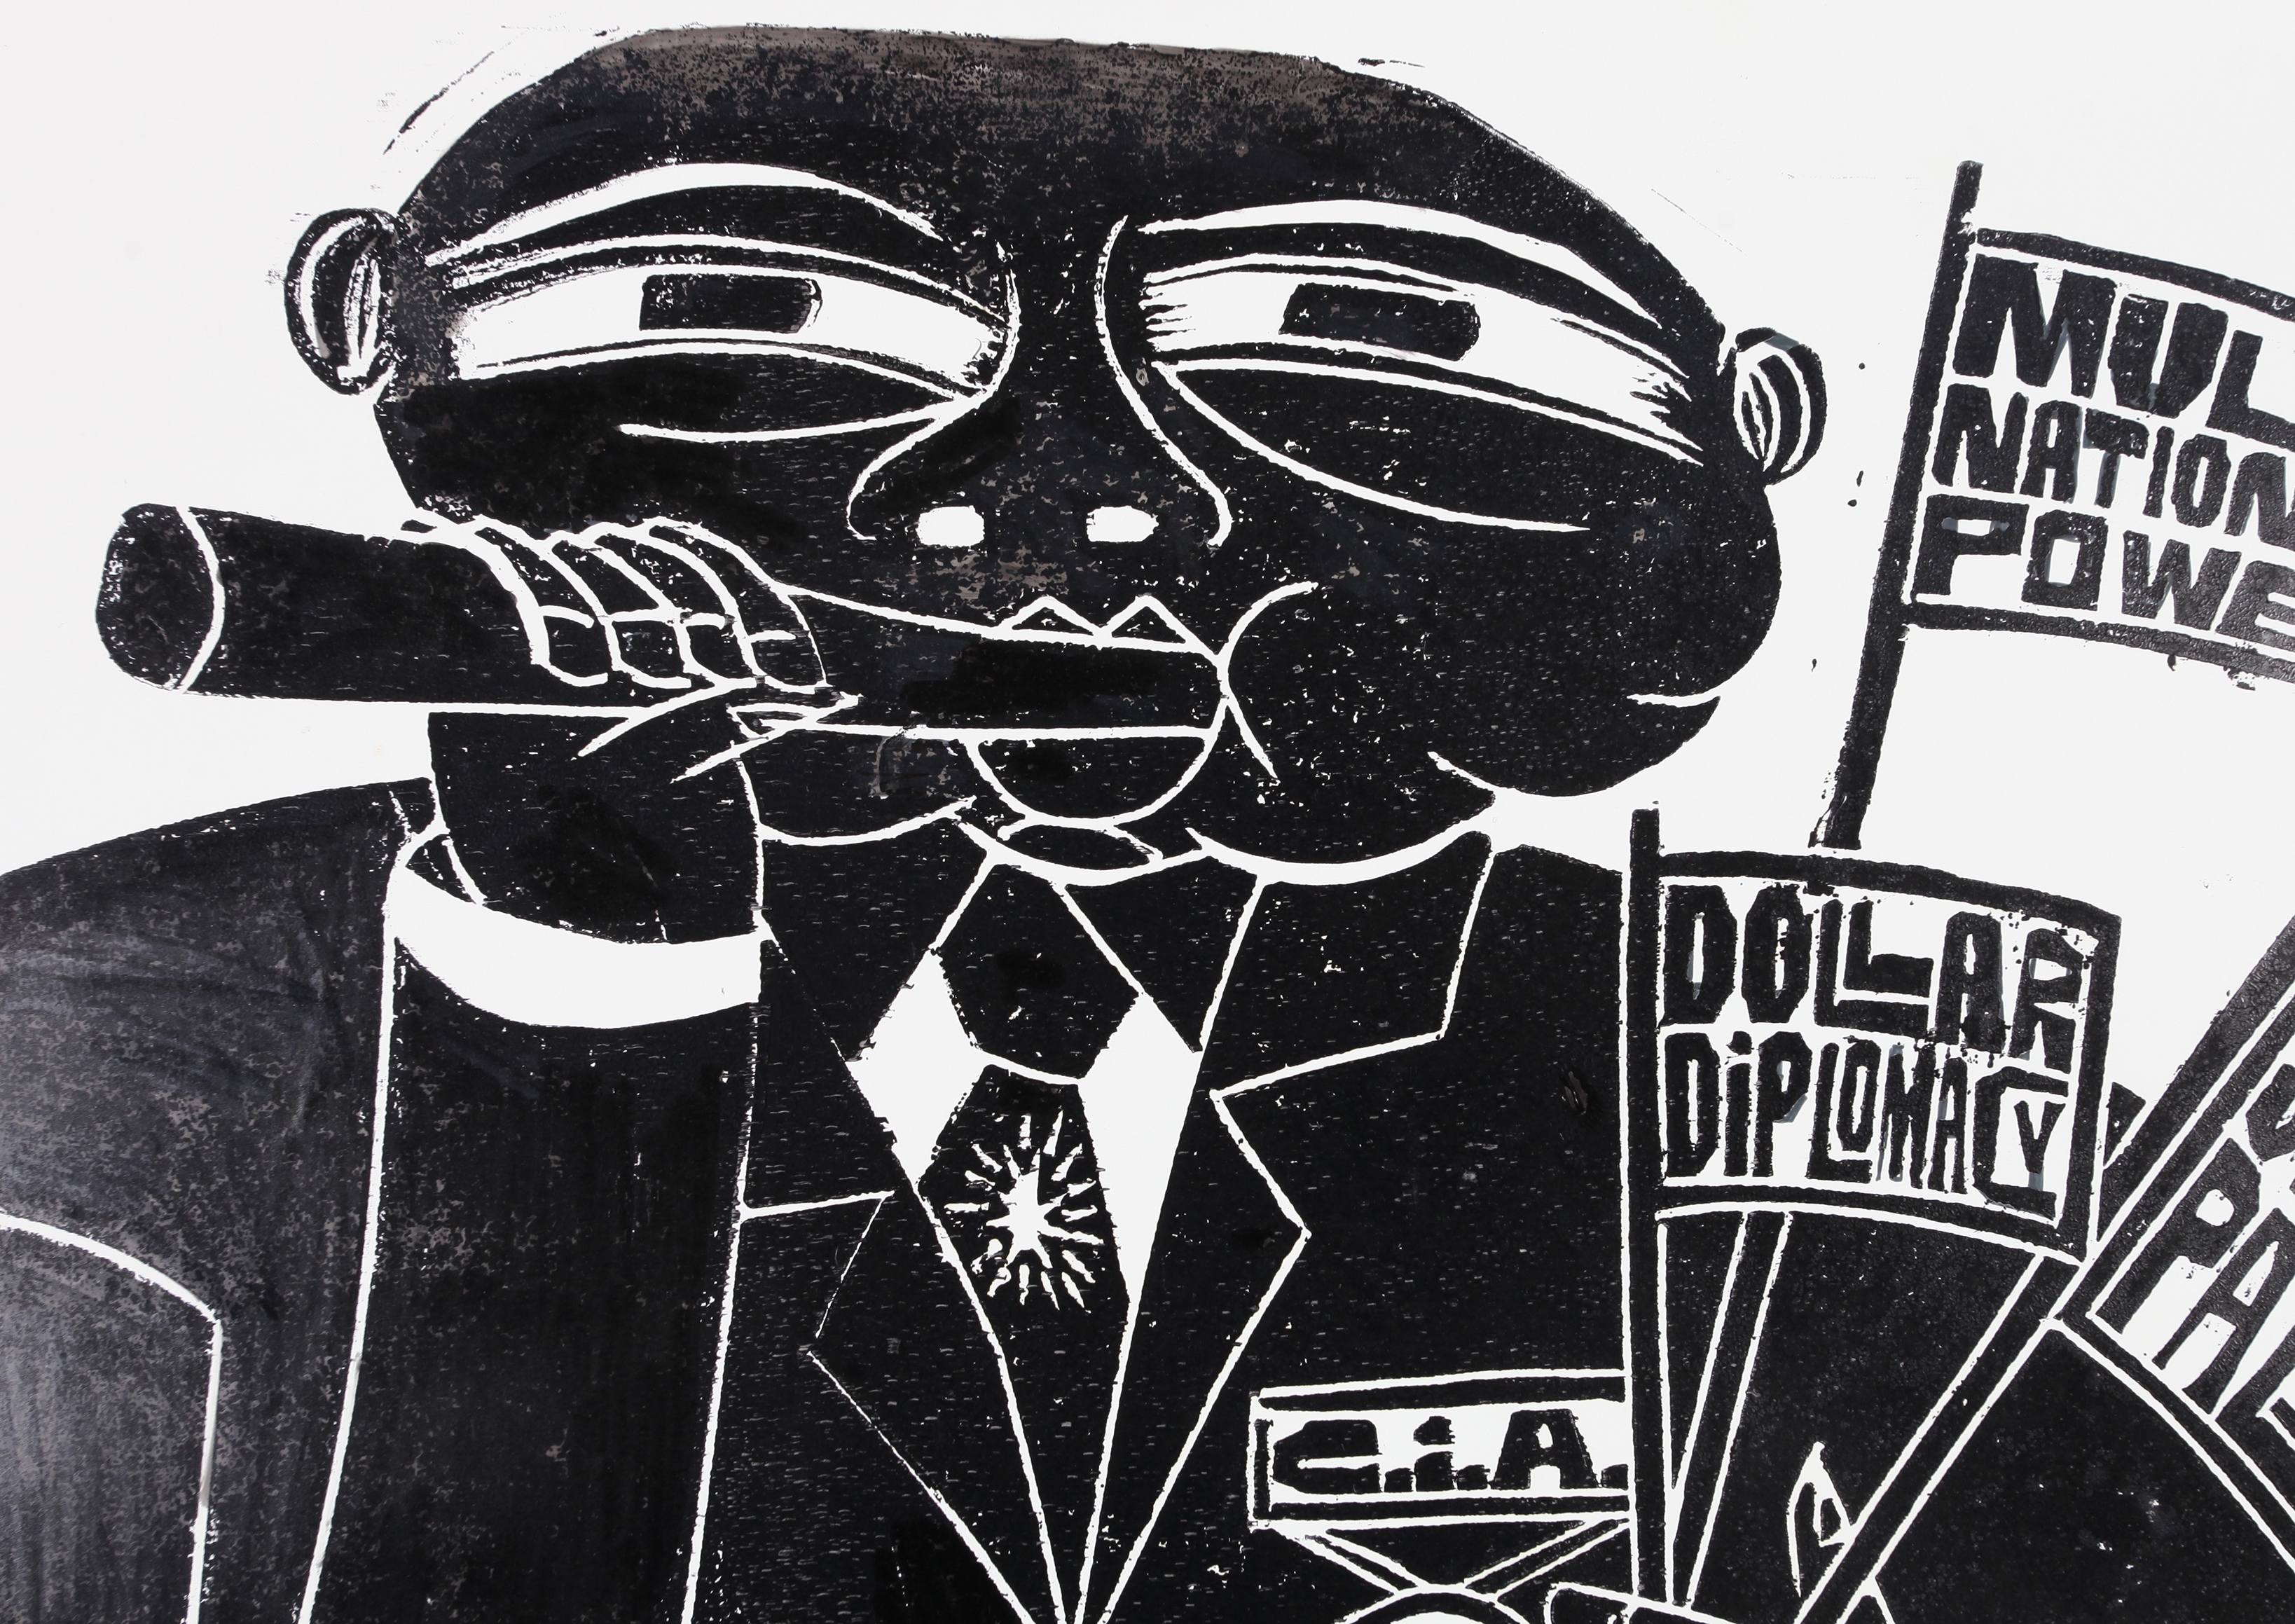 ARR BY AND AFTER PAUL PETER PIECH (American 1920-1996) Multi National Power, Dollar Diplomacy.... - Image 2 of 3